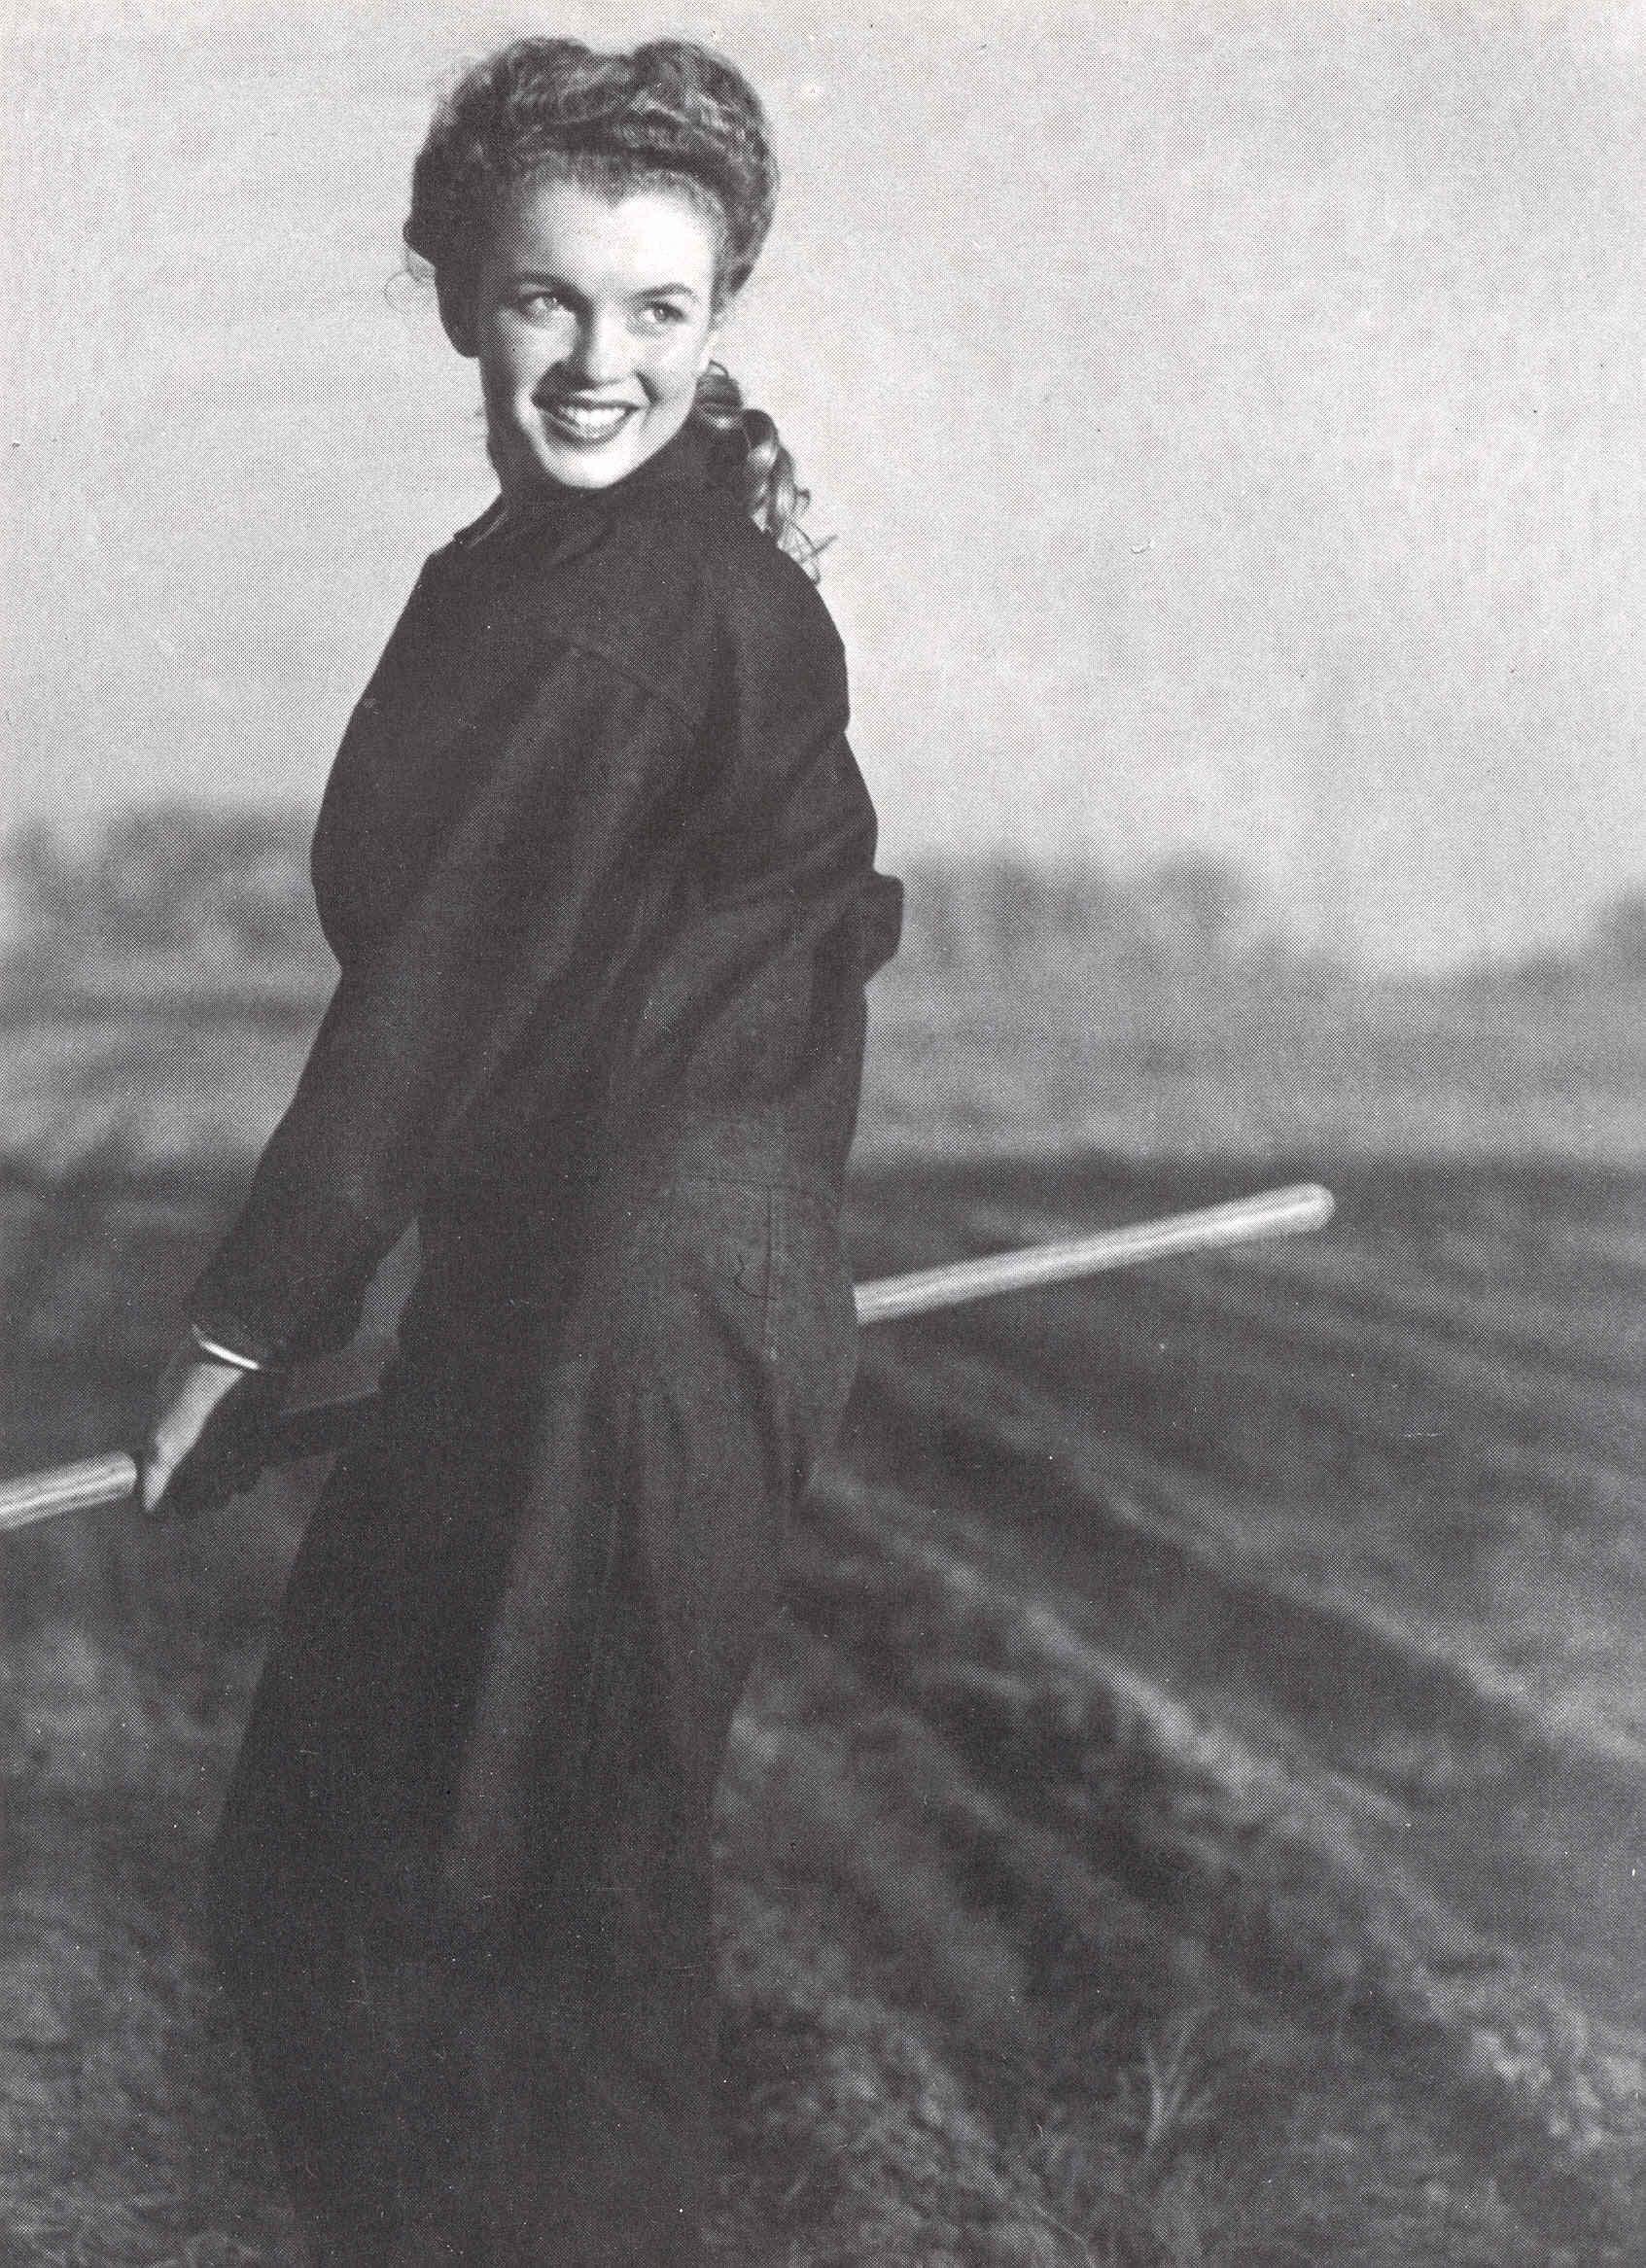 Marilyn Monroe photographed by Andre de Gyeneche (I) Cycle Magnificent Marilyn part 997 - Cycle, Gorgeous, Marilyn Monroe, Actors and actresses, Celebrities, Blonde, Girls, Black and white photo, 1945, Longpost, Norma Jeane